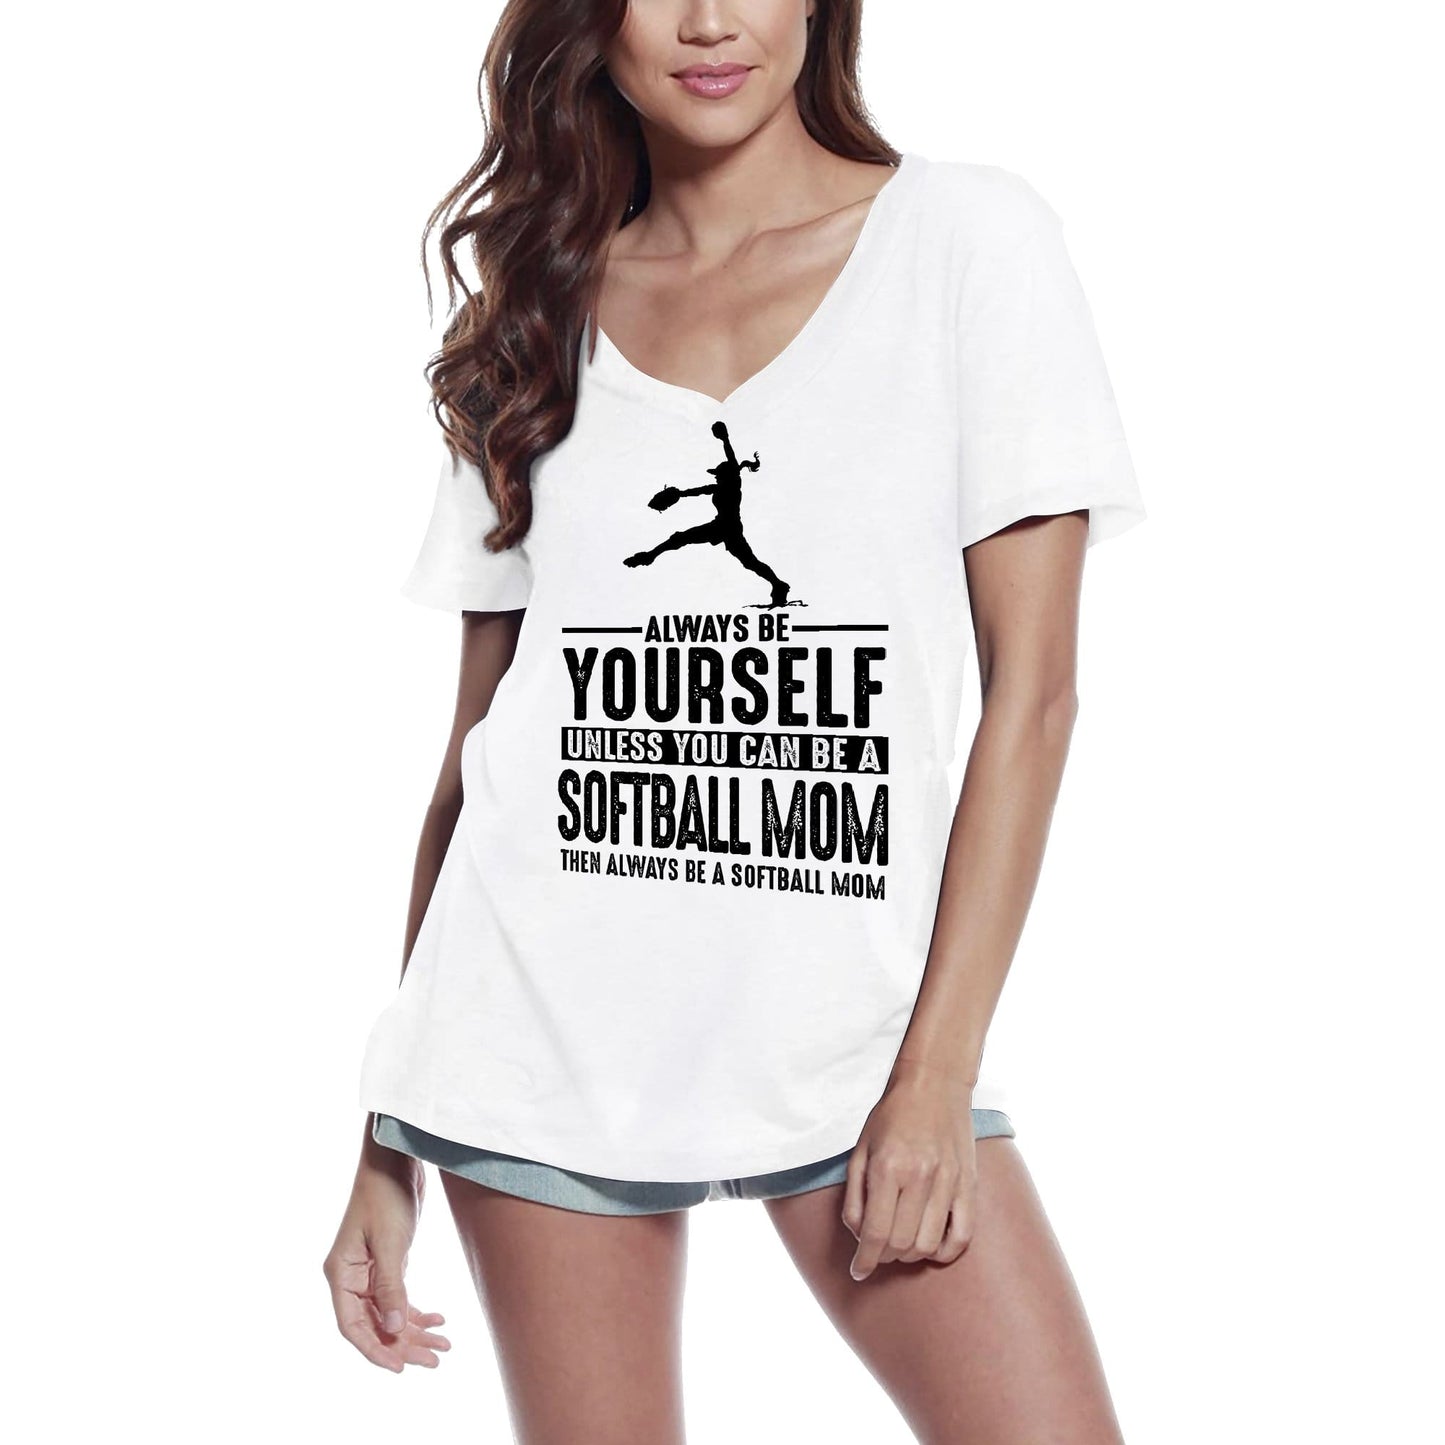 ULTRABASIC Women's T-Shirt Always be Yourself Unless You Can be a Softball Mom - Funny Sport Mother Tee Shirt